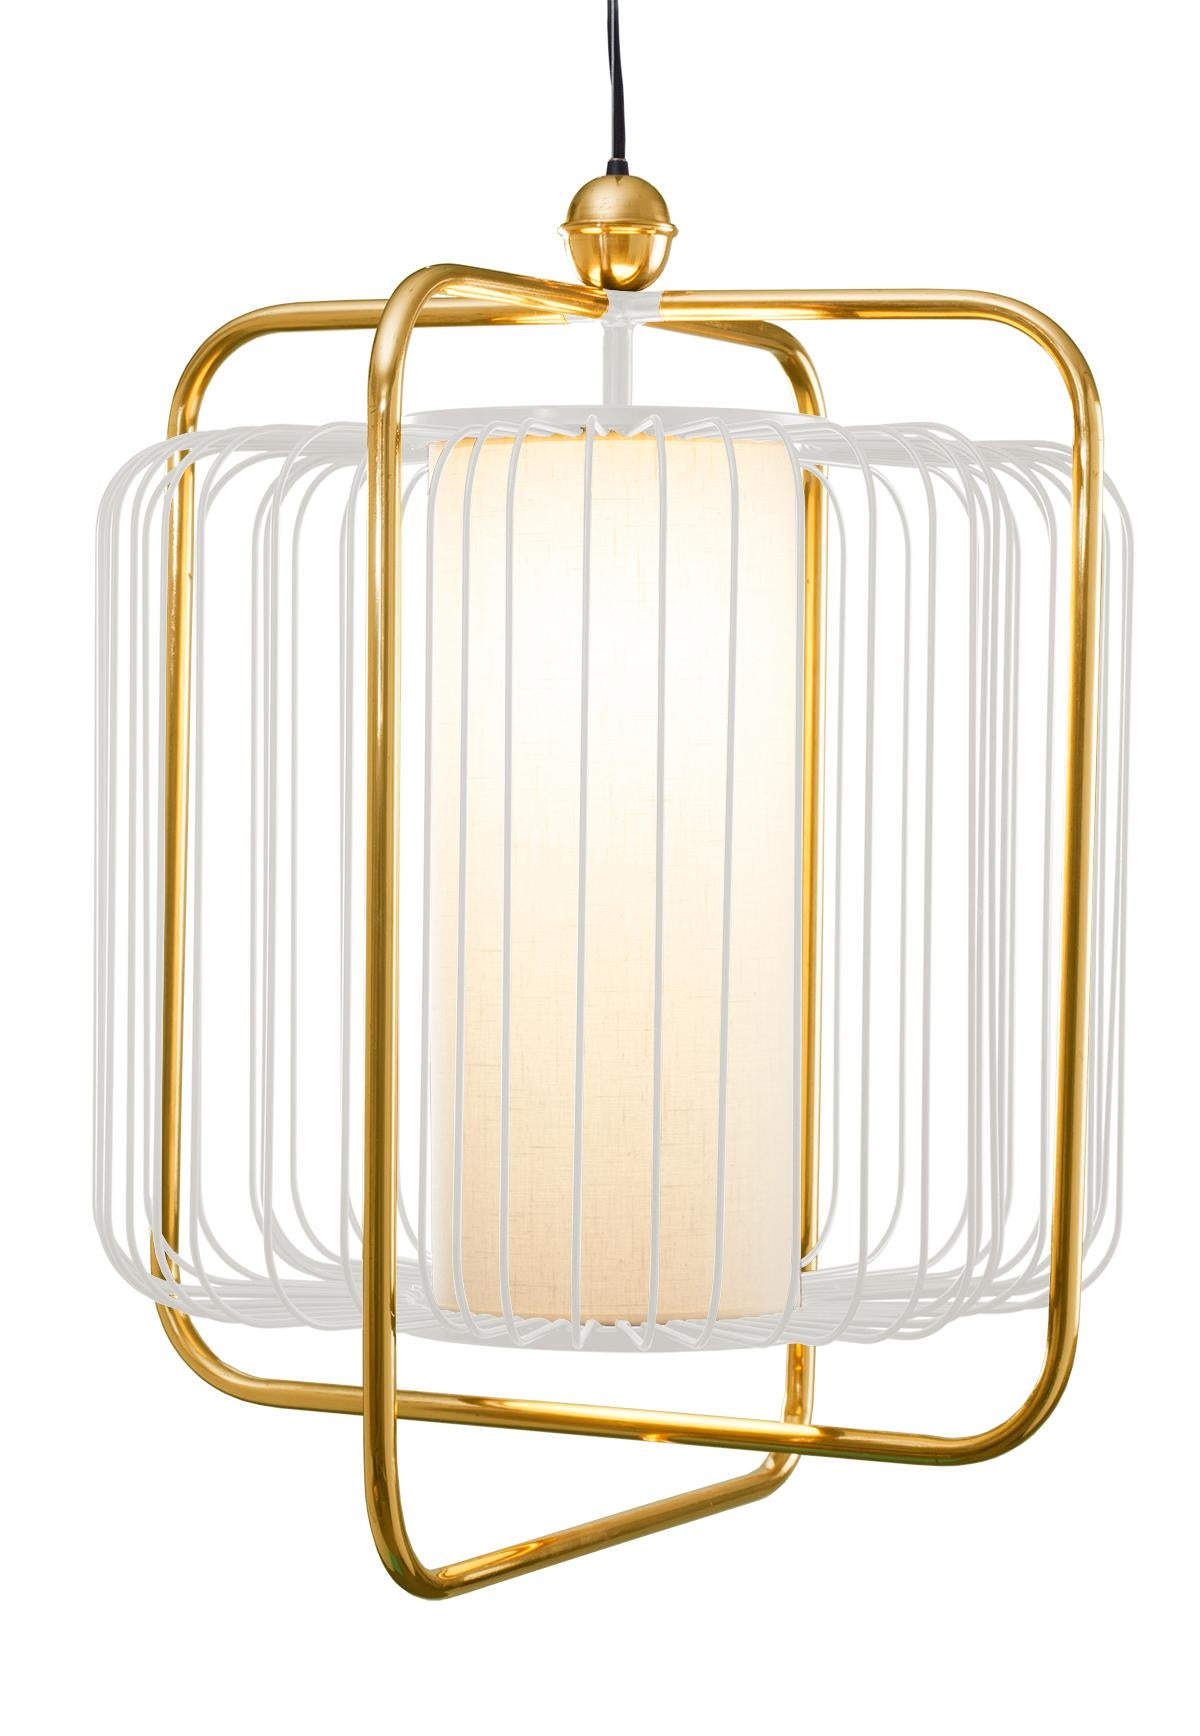 Contemporary Art Deco inspired Jules Pendant Lamp in Brass and Black For Sale 2